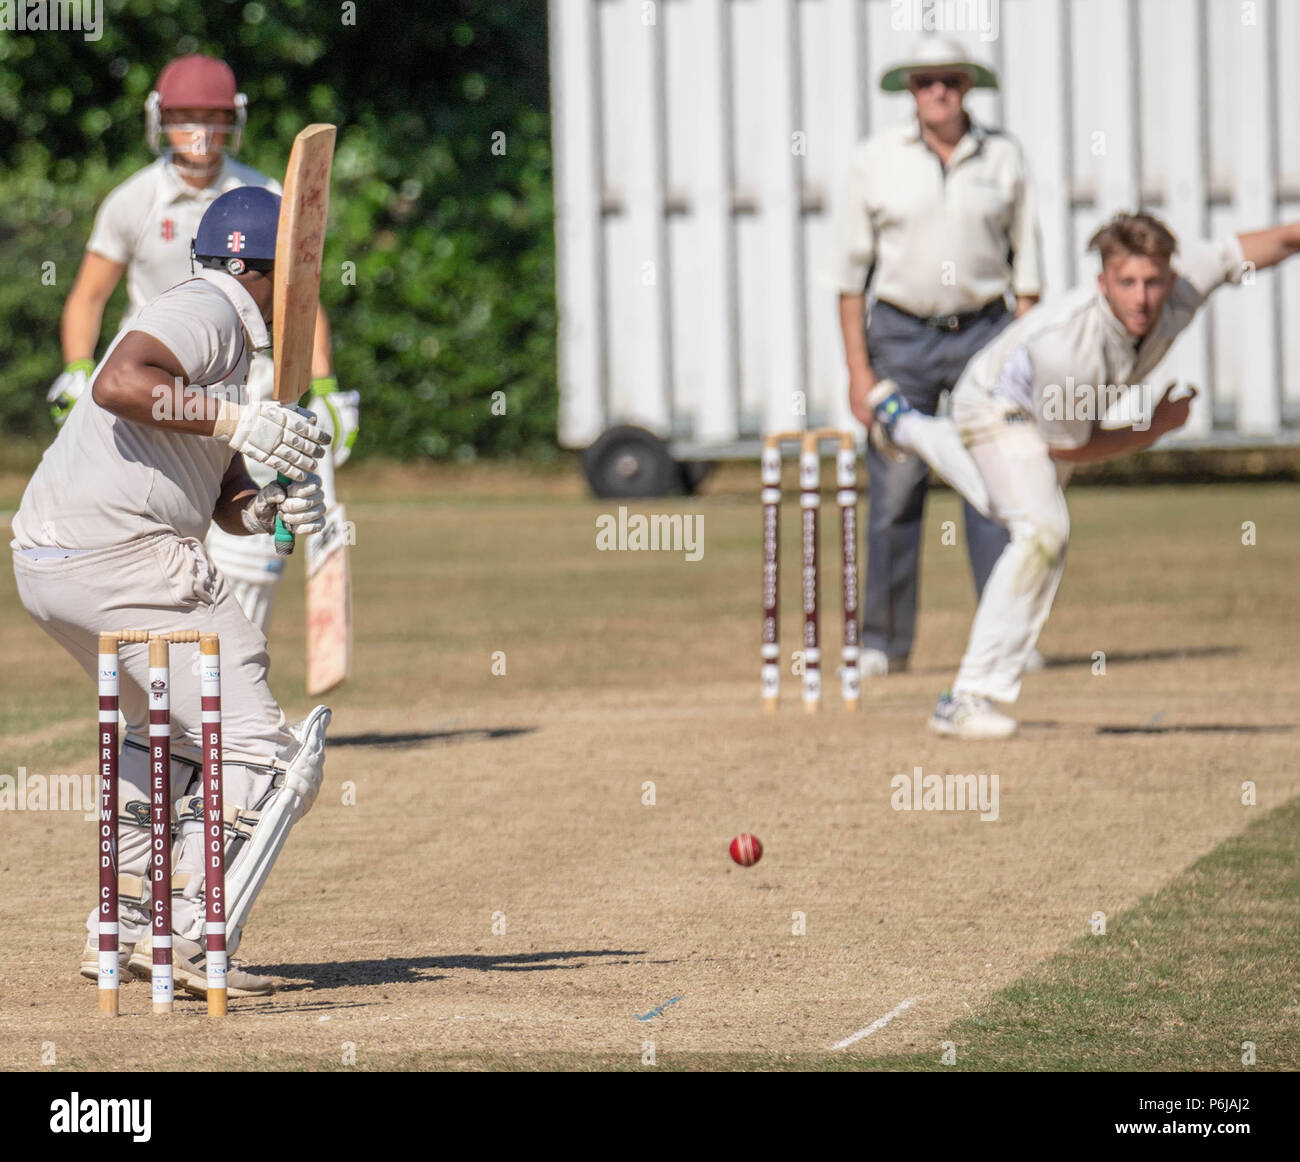 Brentwood Essex, 30th June 2018 Summer cricket Brentwood Cricket club 4th XI vs West Essex Cricket Club 3rd XI Brentwood won with 241 for 4.  Played at the Old County Ground Brentwood Credit Ian Davidson/Alamy Live News Stock Photo